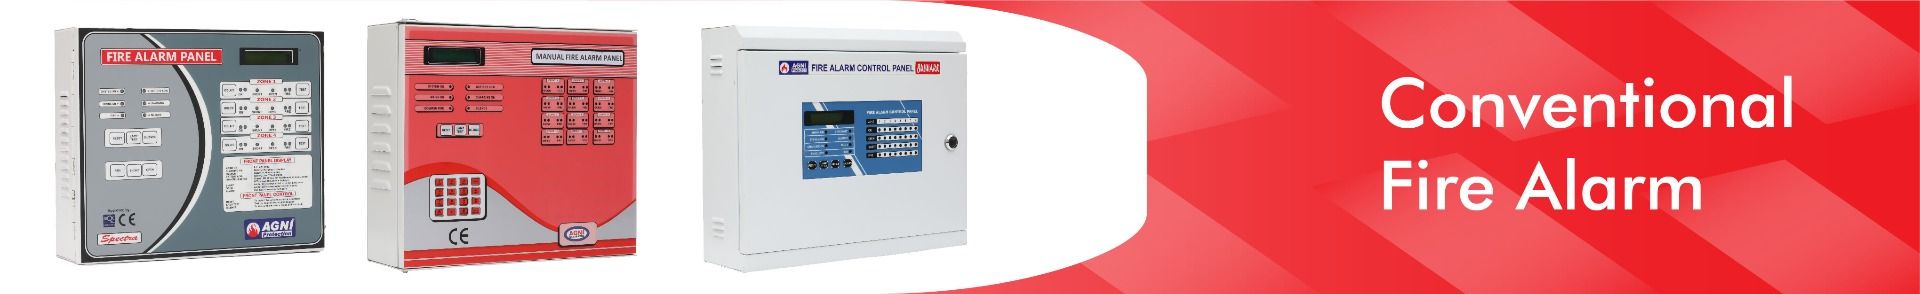 Conventional Alarm System